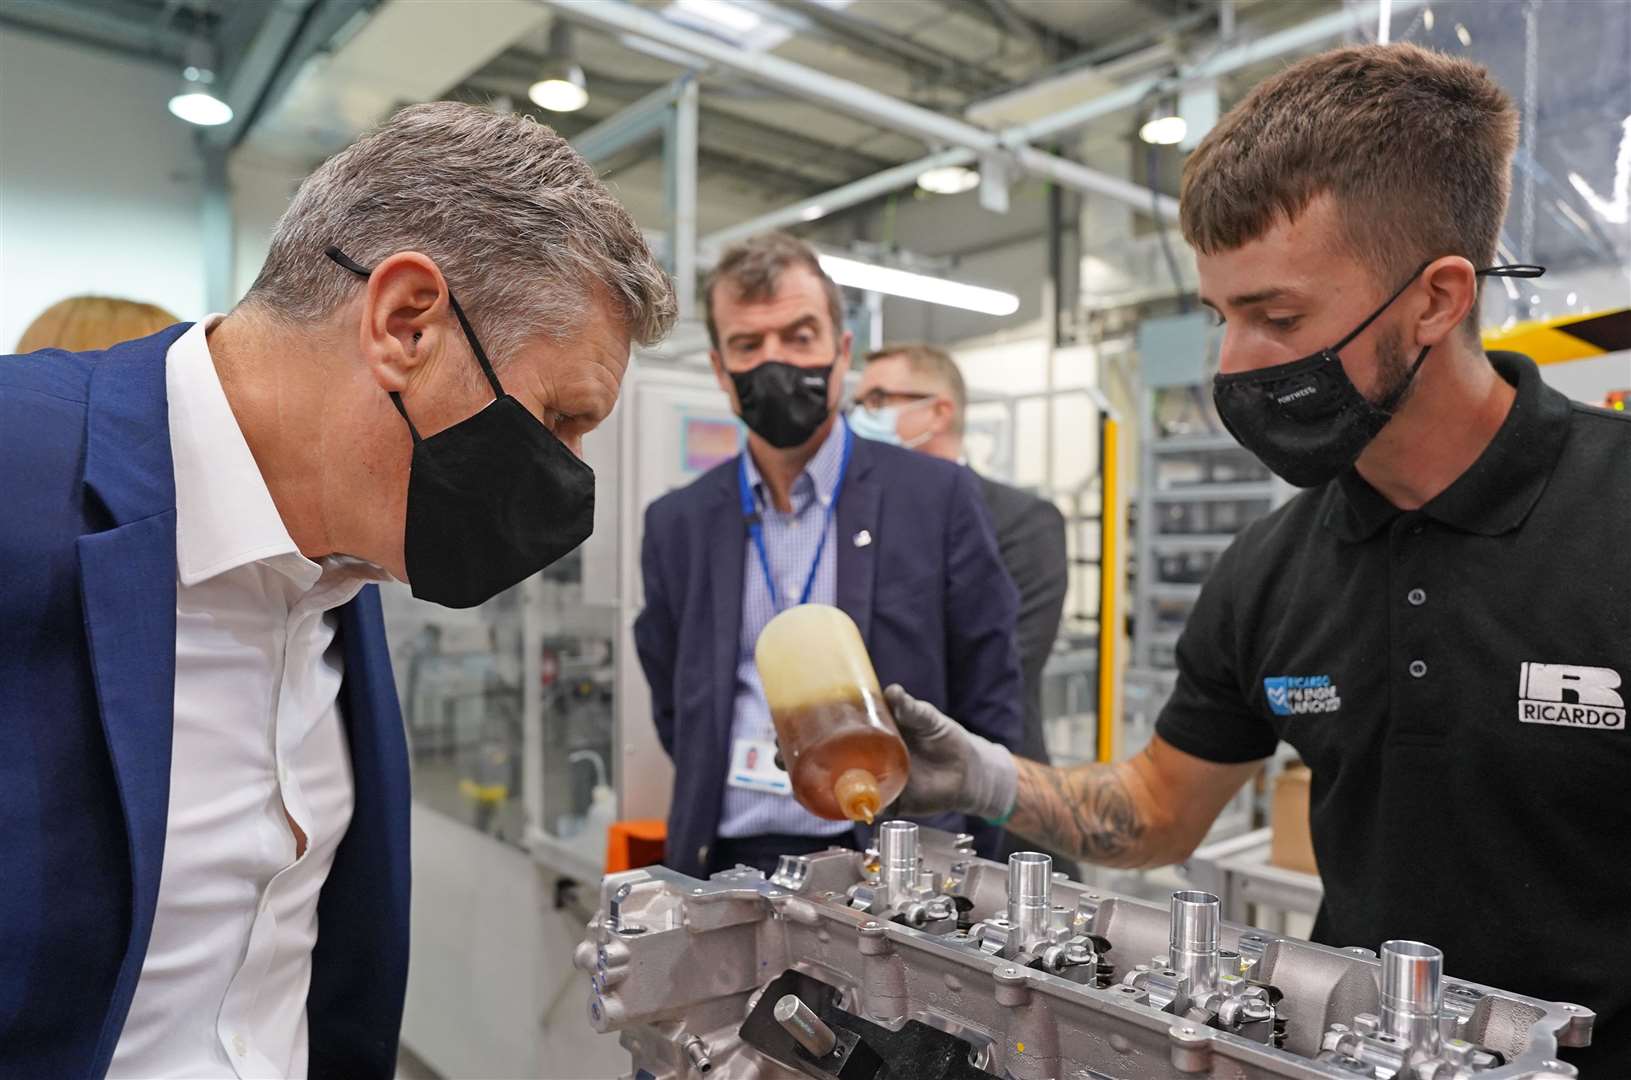 Sir Keir Starmer (left) during a visit to engineering firm Ricardo in Shoreham-by-Sea, West Sussex, ahead of the Labour Party conference (Stefan Rousseau/PA)